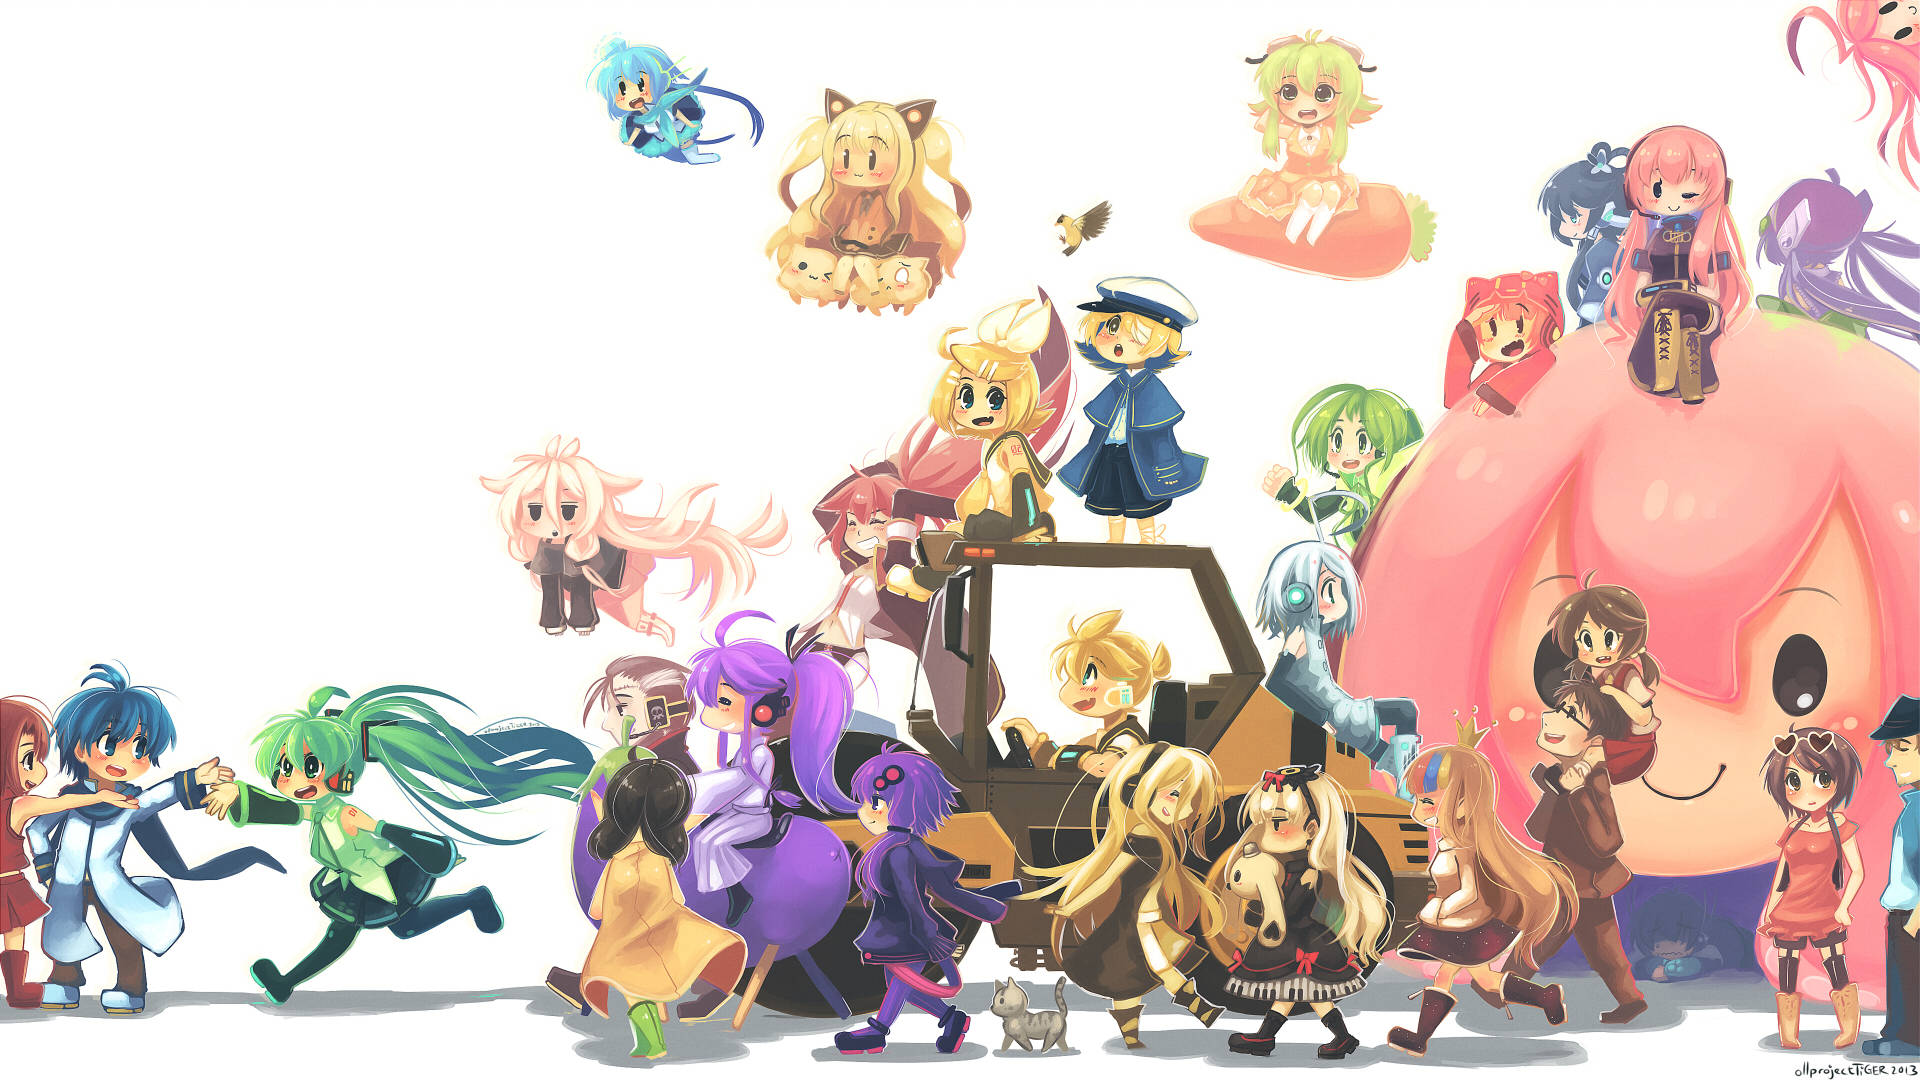 A Colorful And Cheerful Scene Featuring The Beloved Vocaloid Character